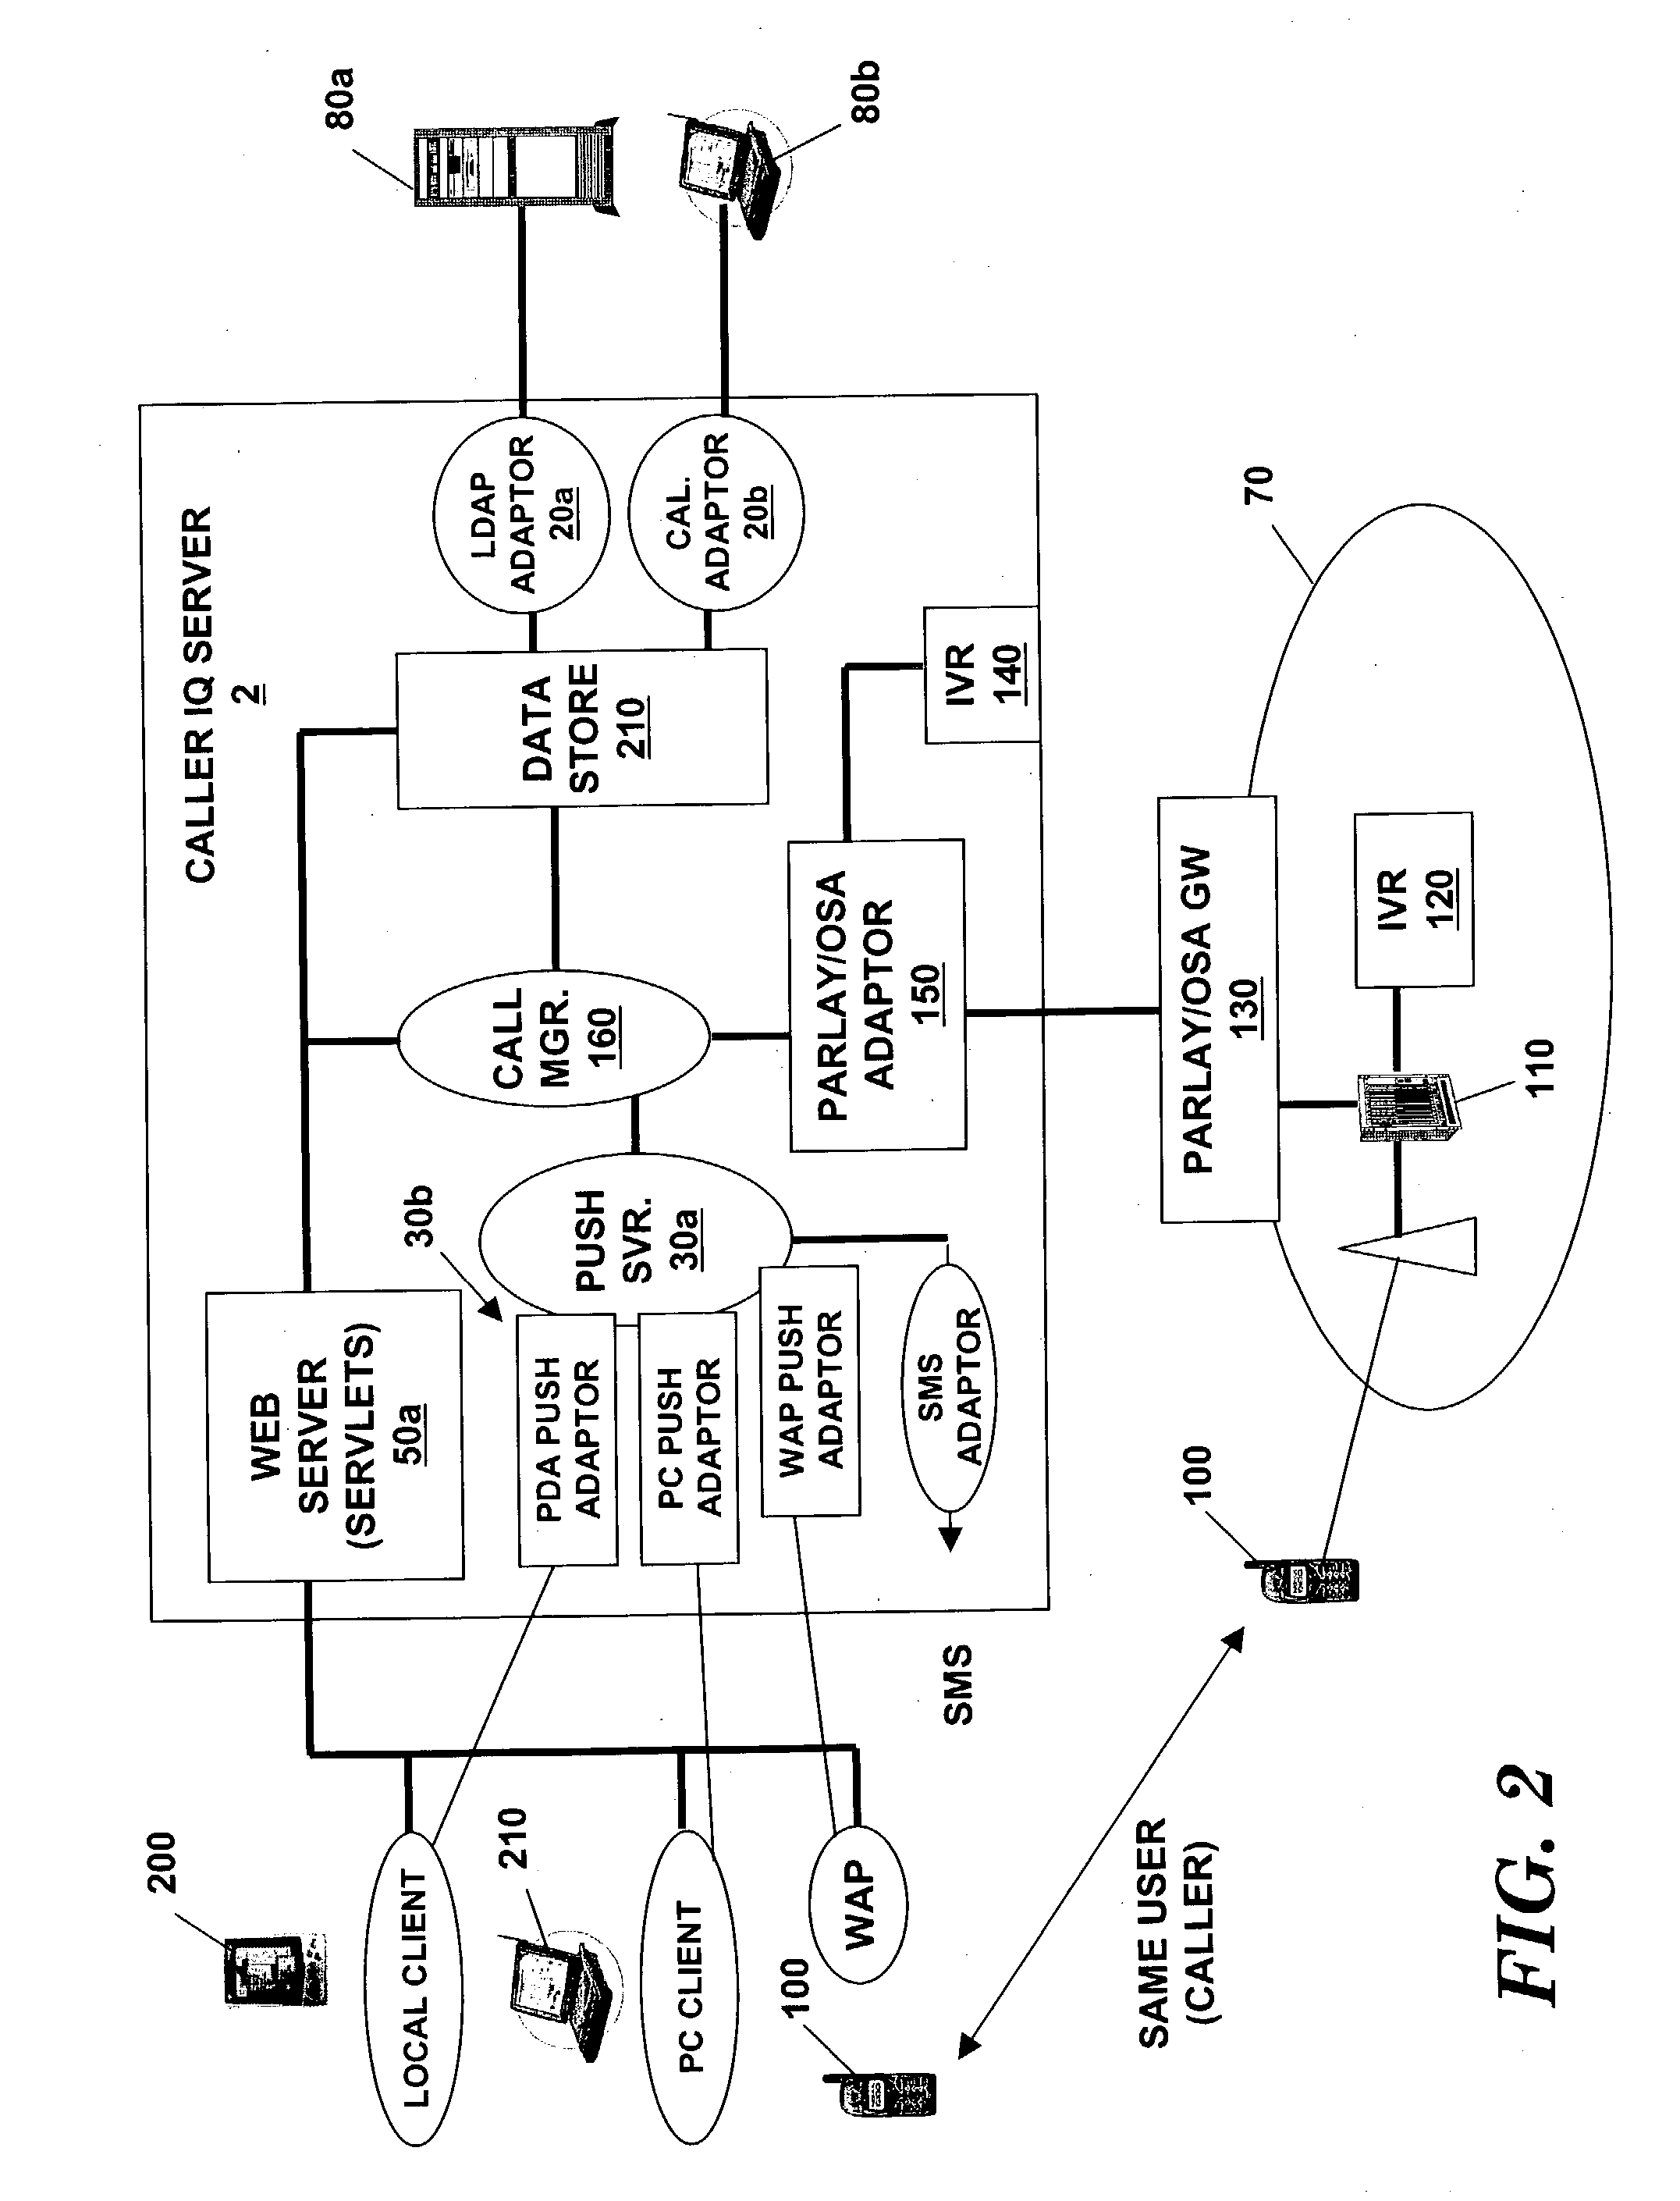 Method and system for supporting non-intrusive and effective voice communication among mobile users